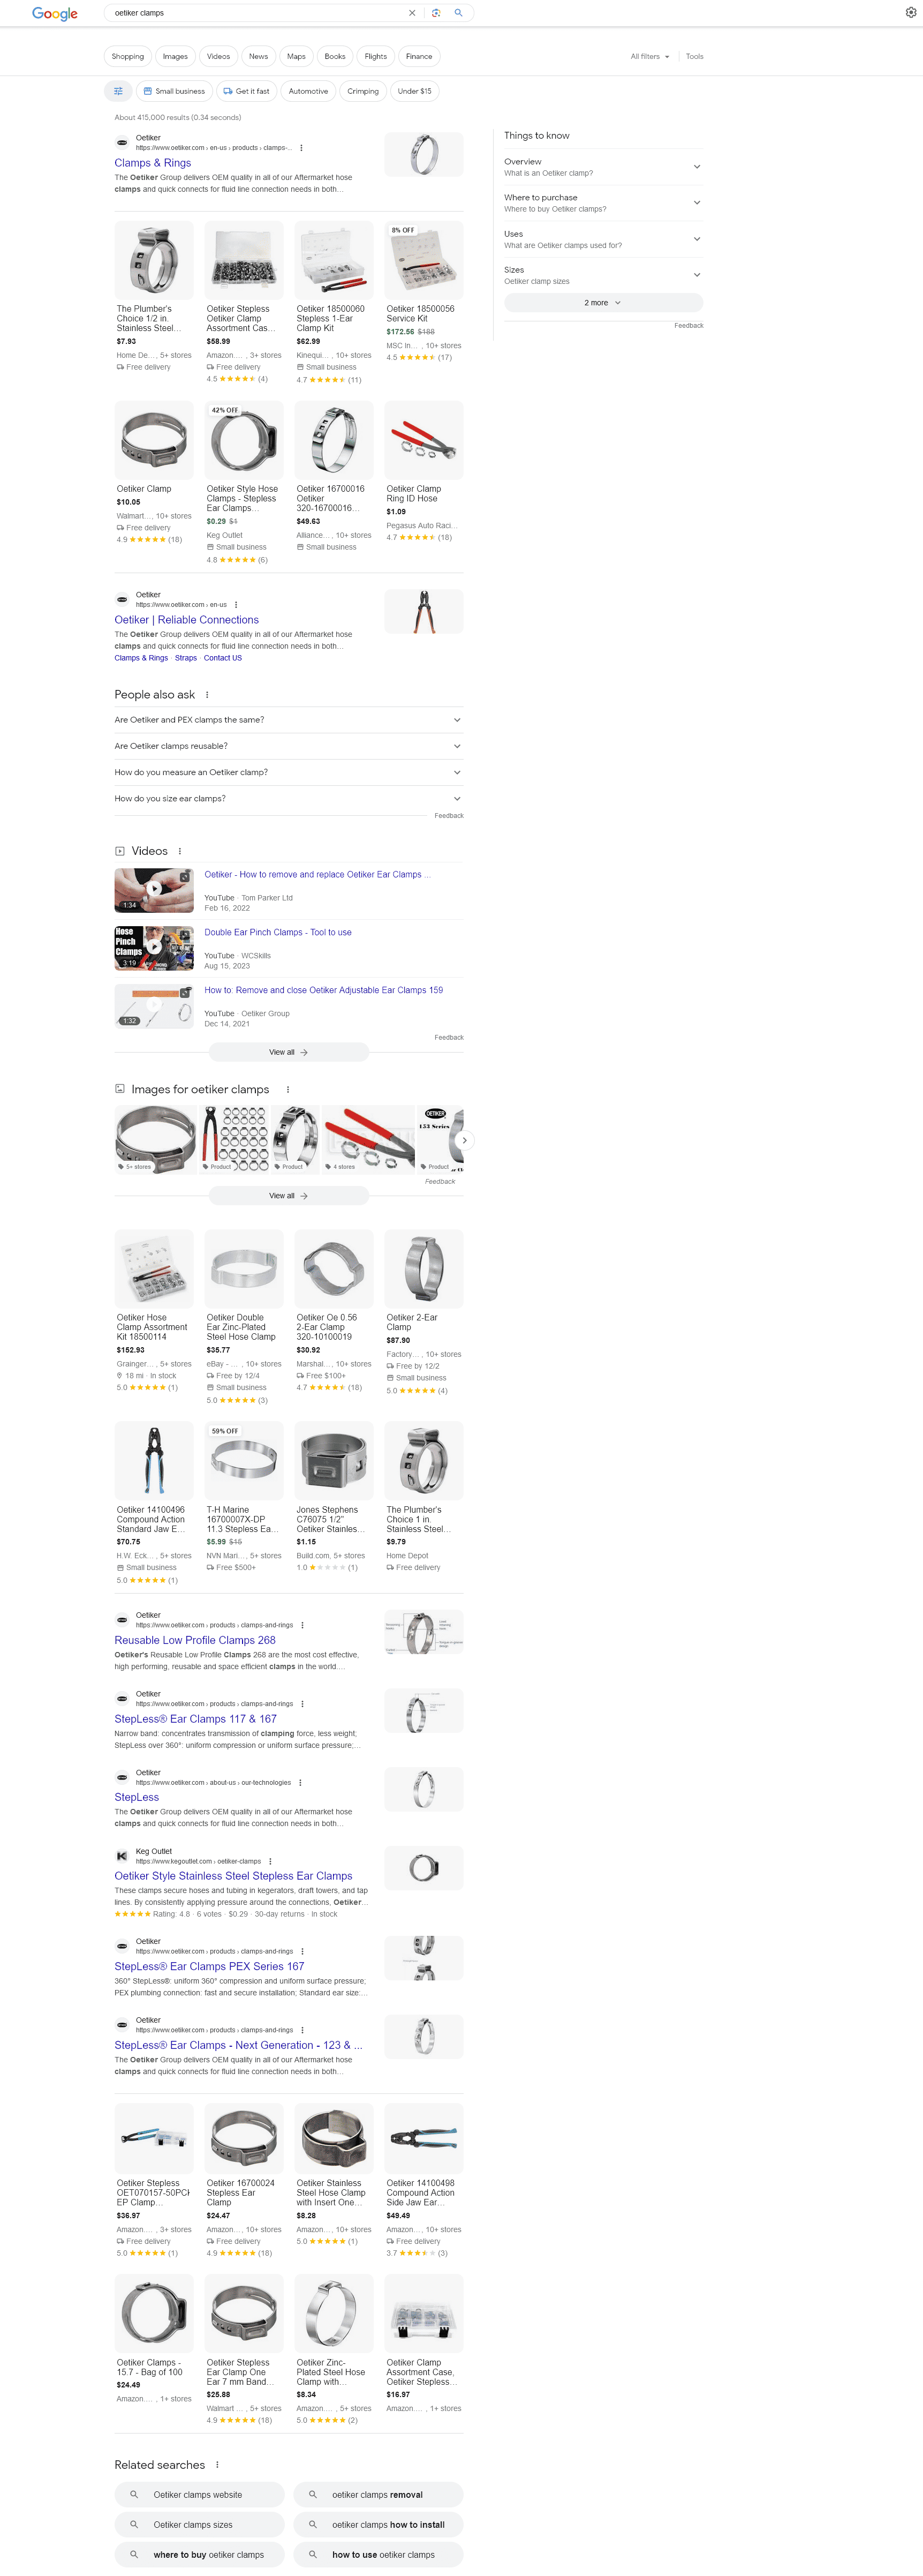 oetiker clamps Google search results